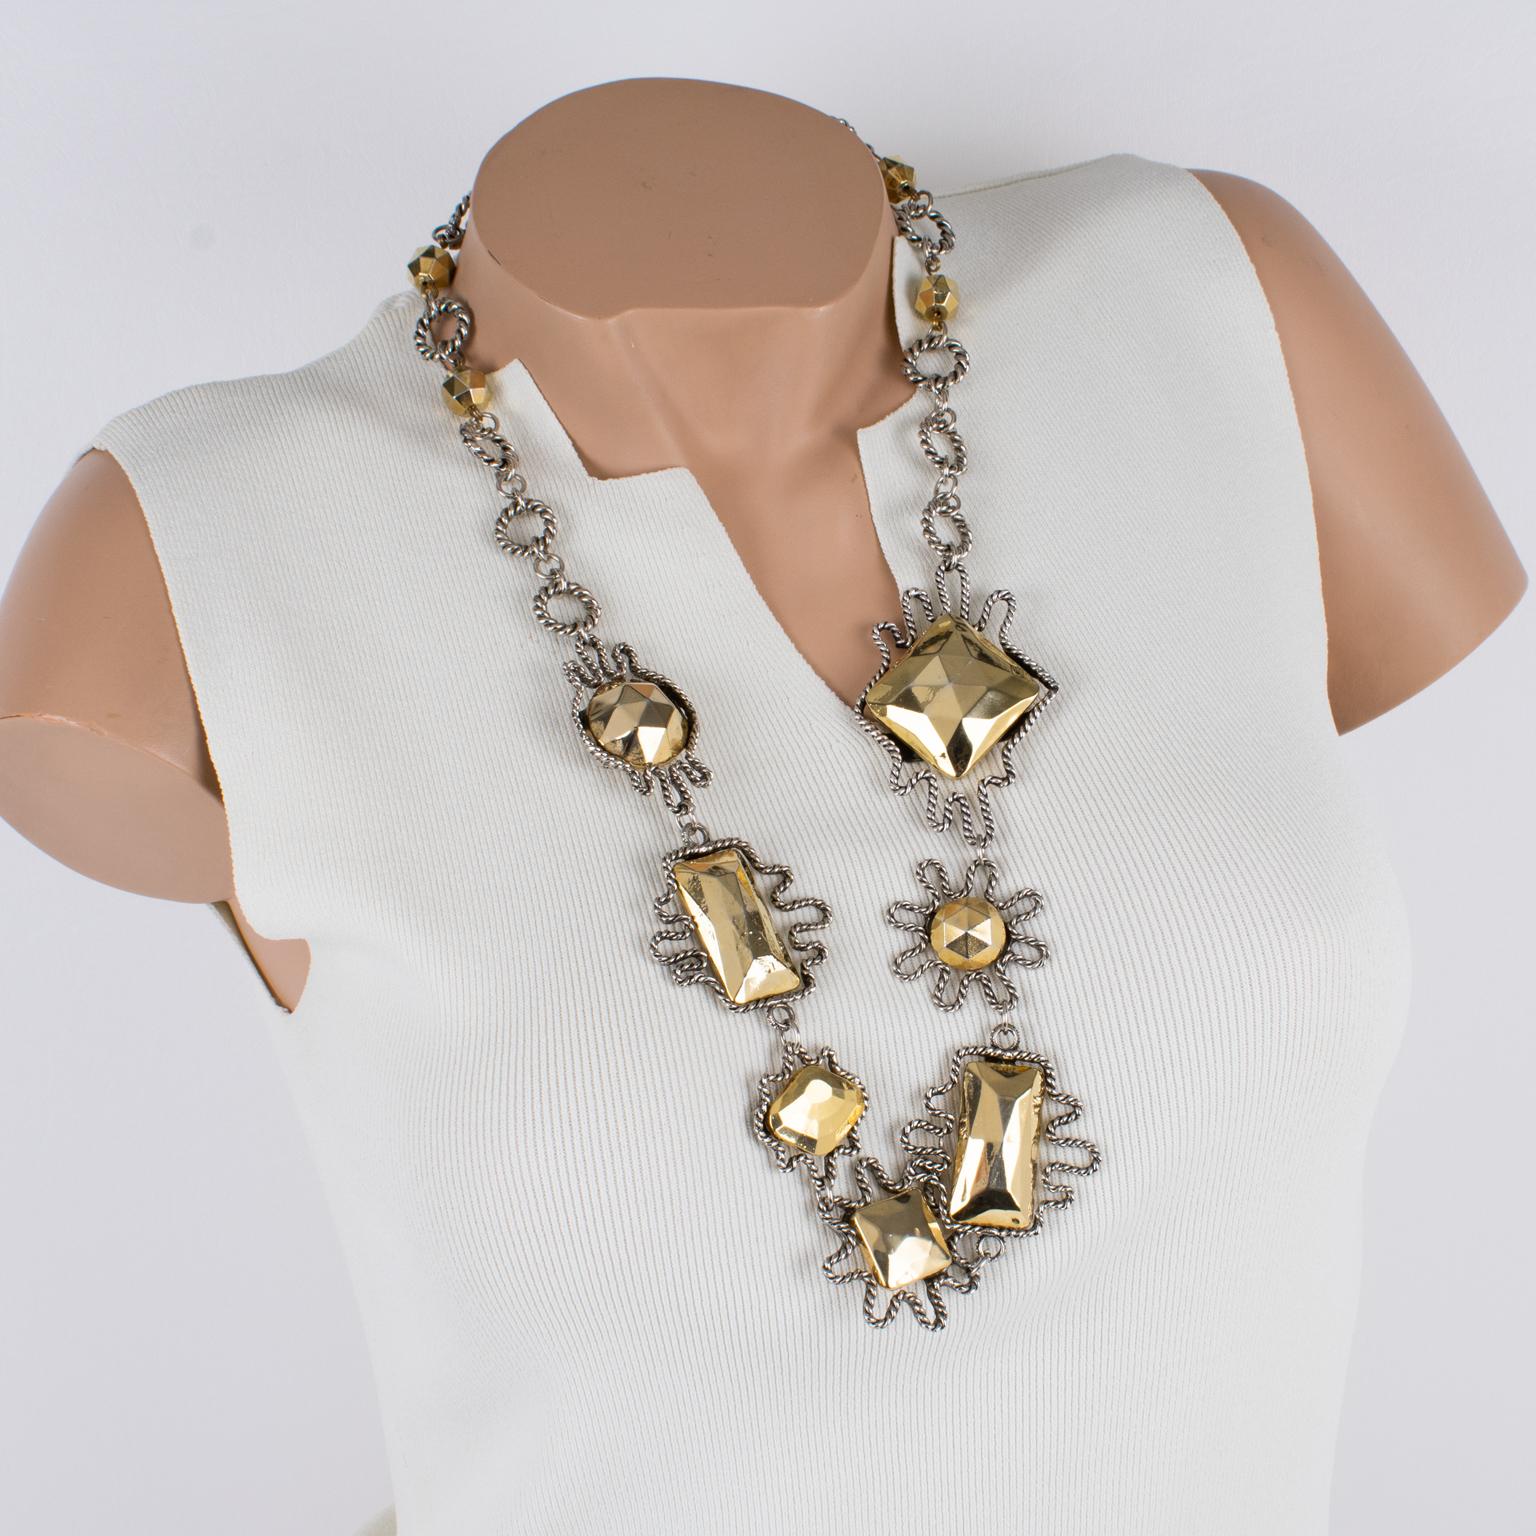 This stunning charm necklace was designed by French jewelry maker Alexis Lahellec in the 1980s. This piece features a silver plate rope chain ornate with charm medallions. Each medallion has a different shape with silver plate framing topped with